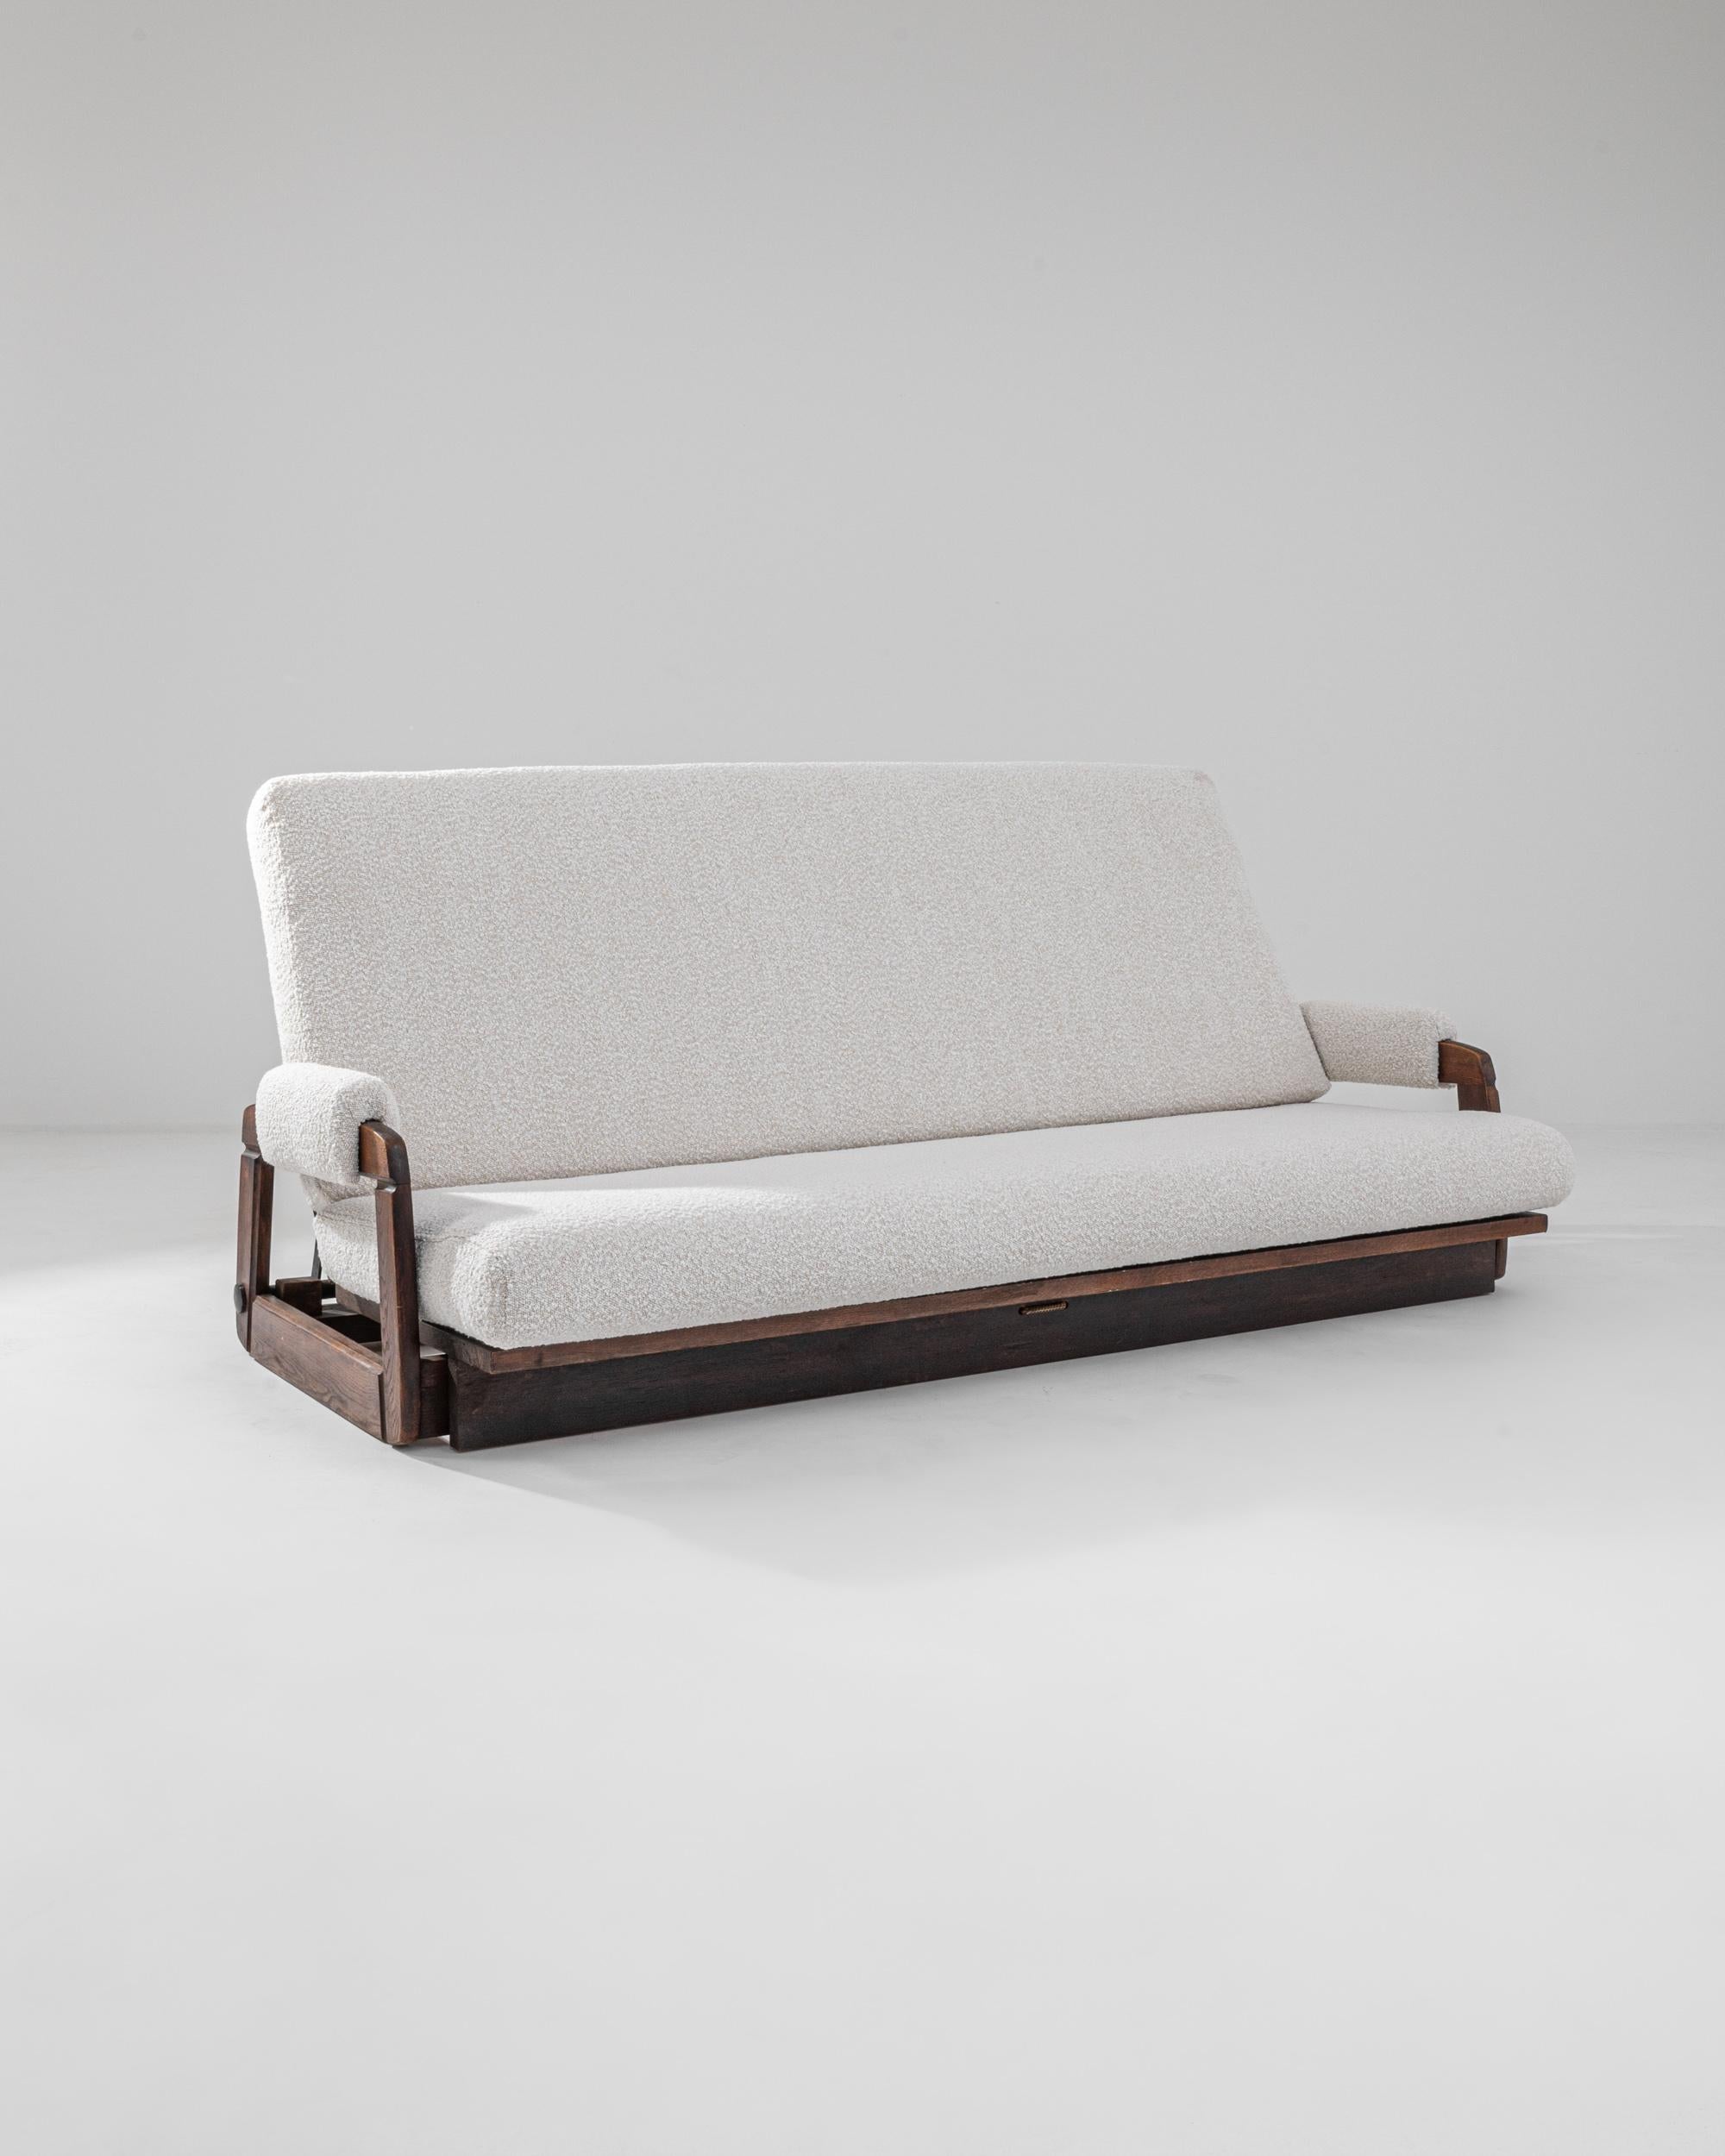 A wooden upholstered sofa made in mid-20th century France. A soft ivory boucle upholstery brings a fresh modern look to this vintage gem. The back of this adaptable piece folds down to transform the sofa into a bed, a space saving feature for